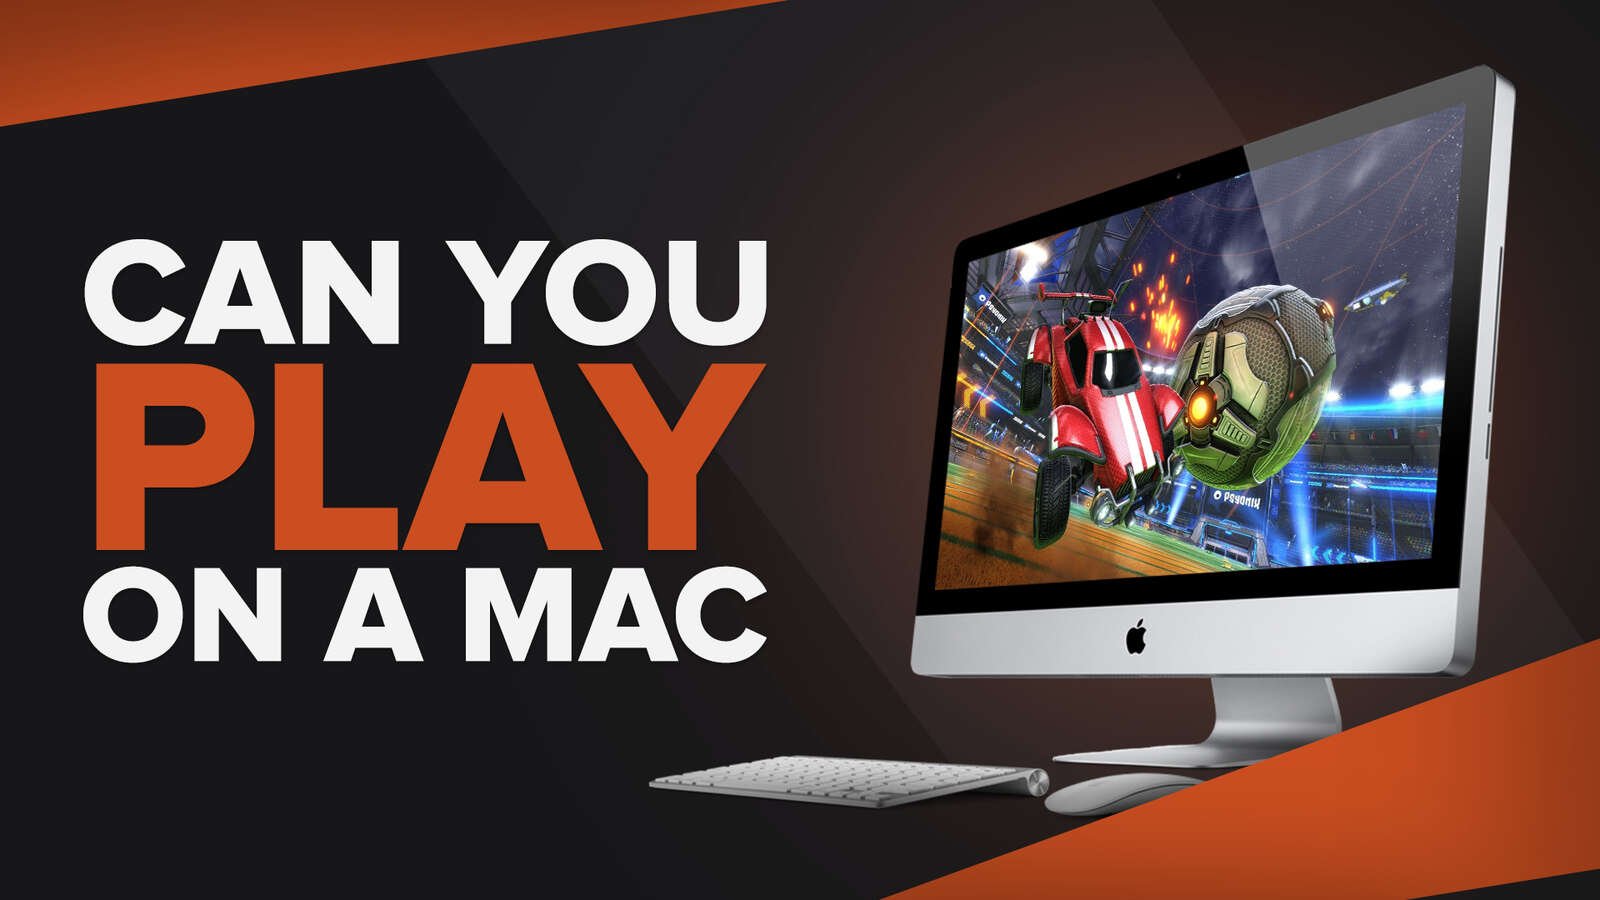 Here’s a guide on how you can play Rocket League on your Mac today!